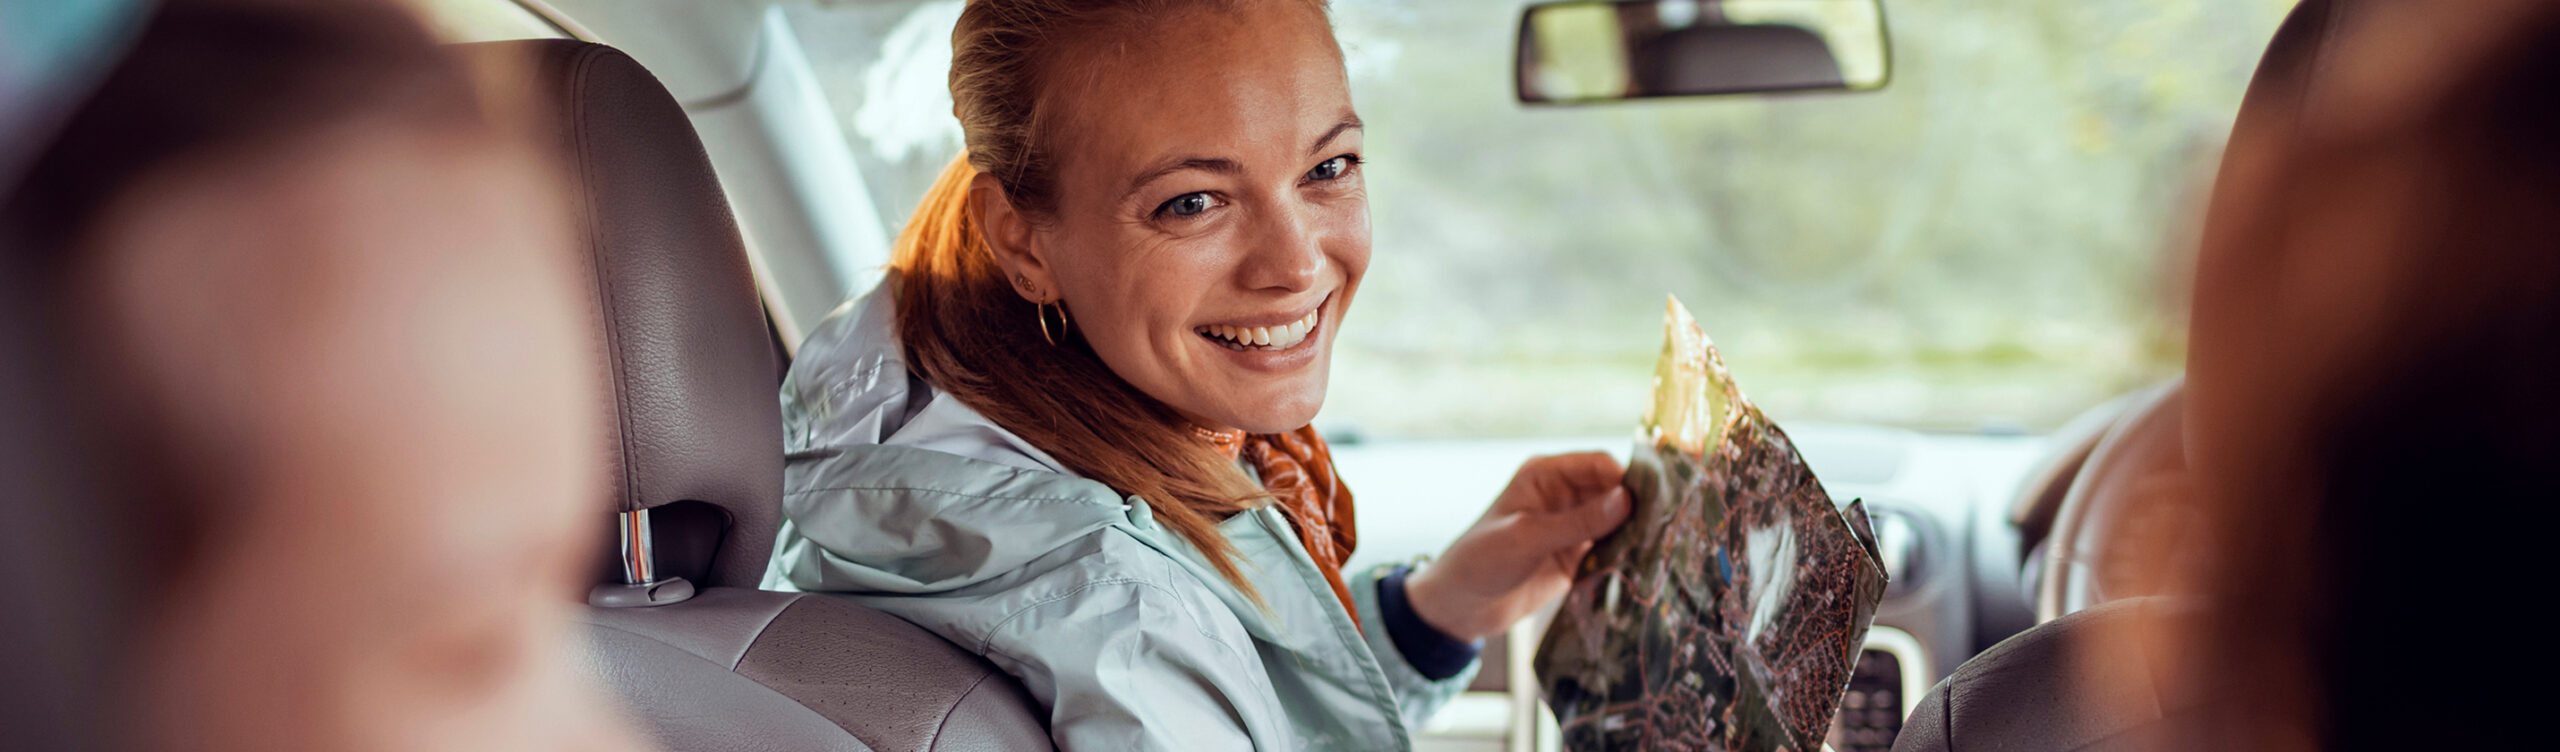 Women smiling in car looking at kids in back seat